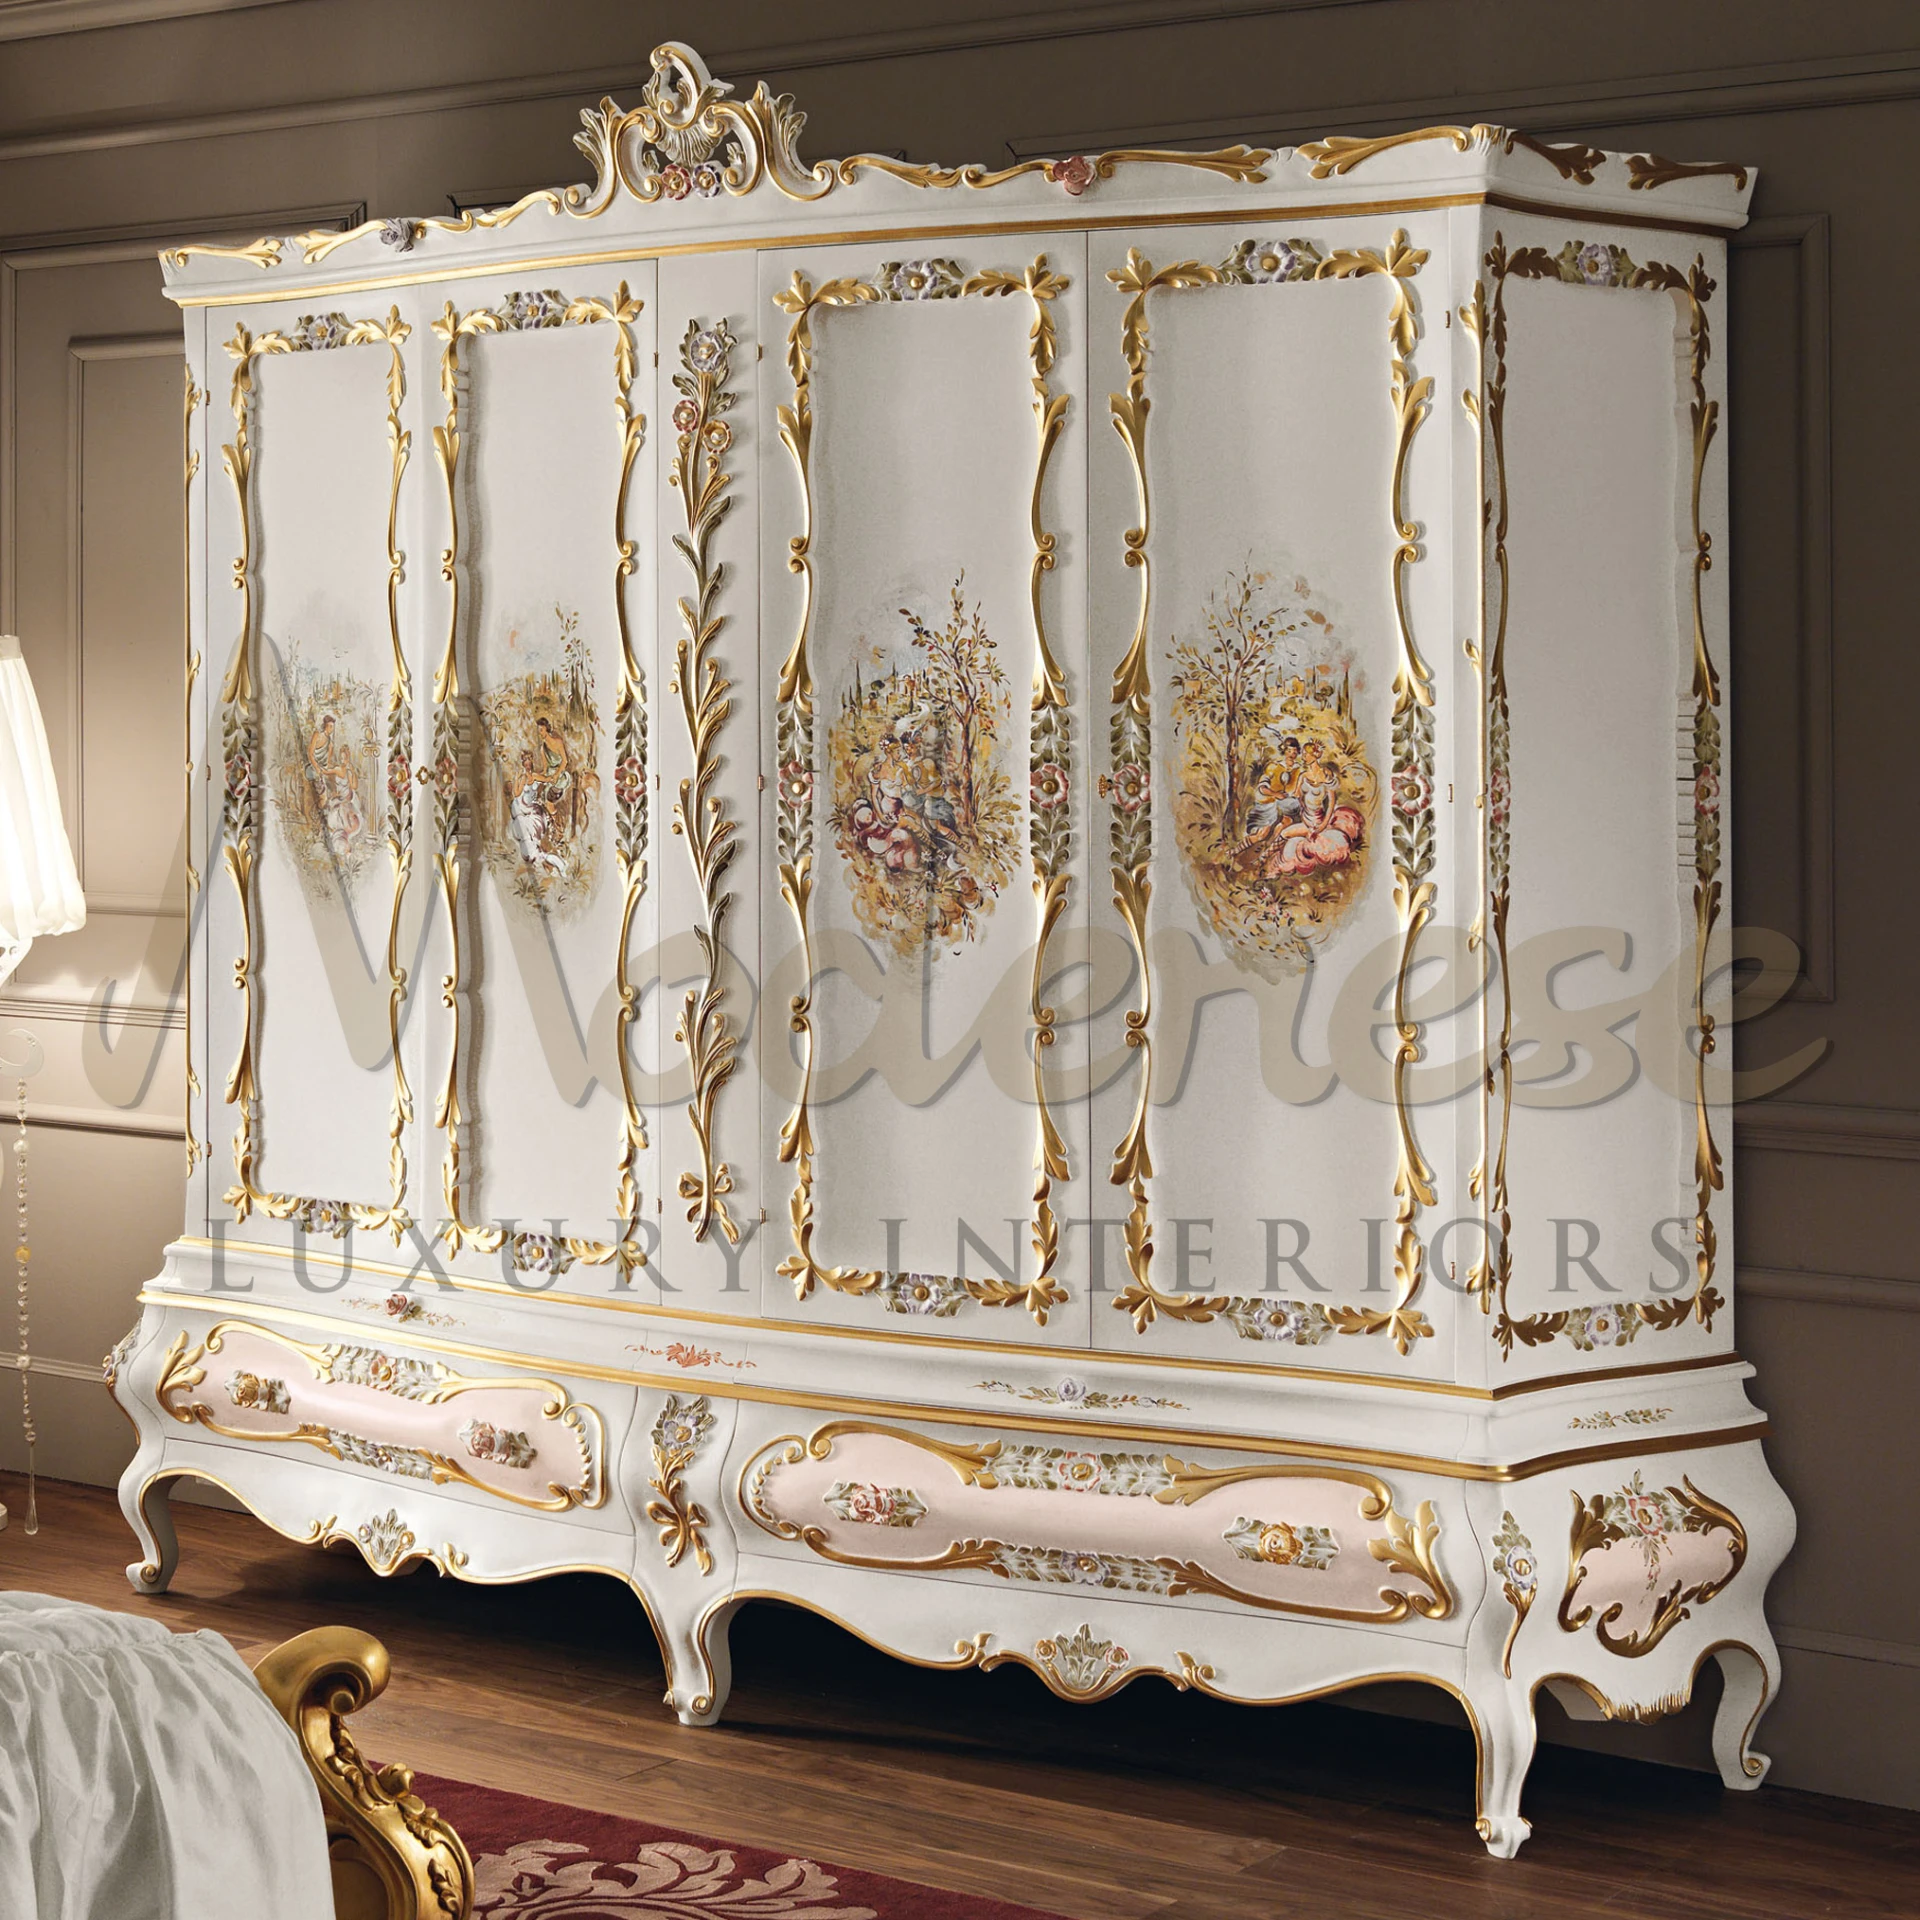 Elegant hand-painted wardrobe with intricate carvings and gold embellishments.                                                                                            